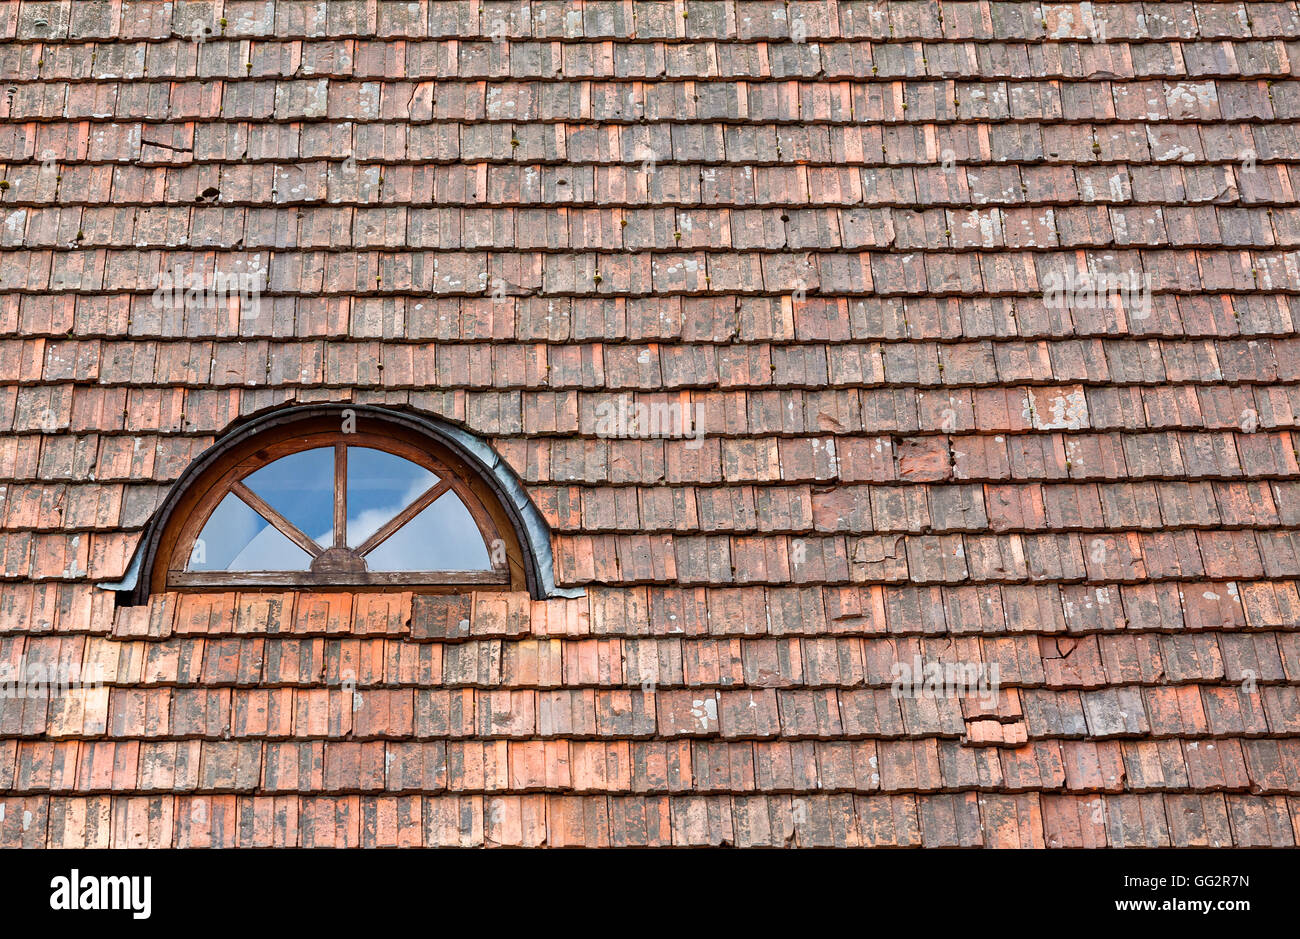 Old red weathered roof tiles with dormer window Stock Photo